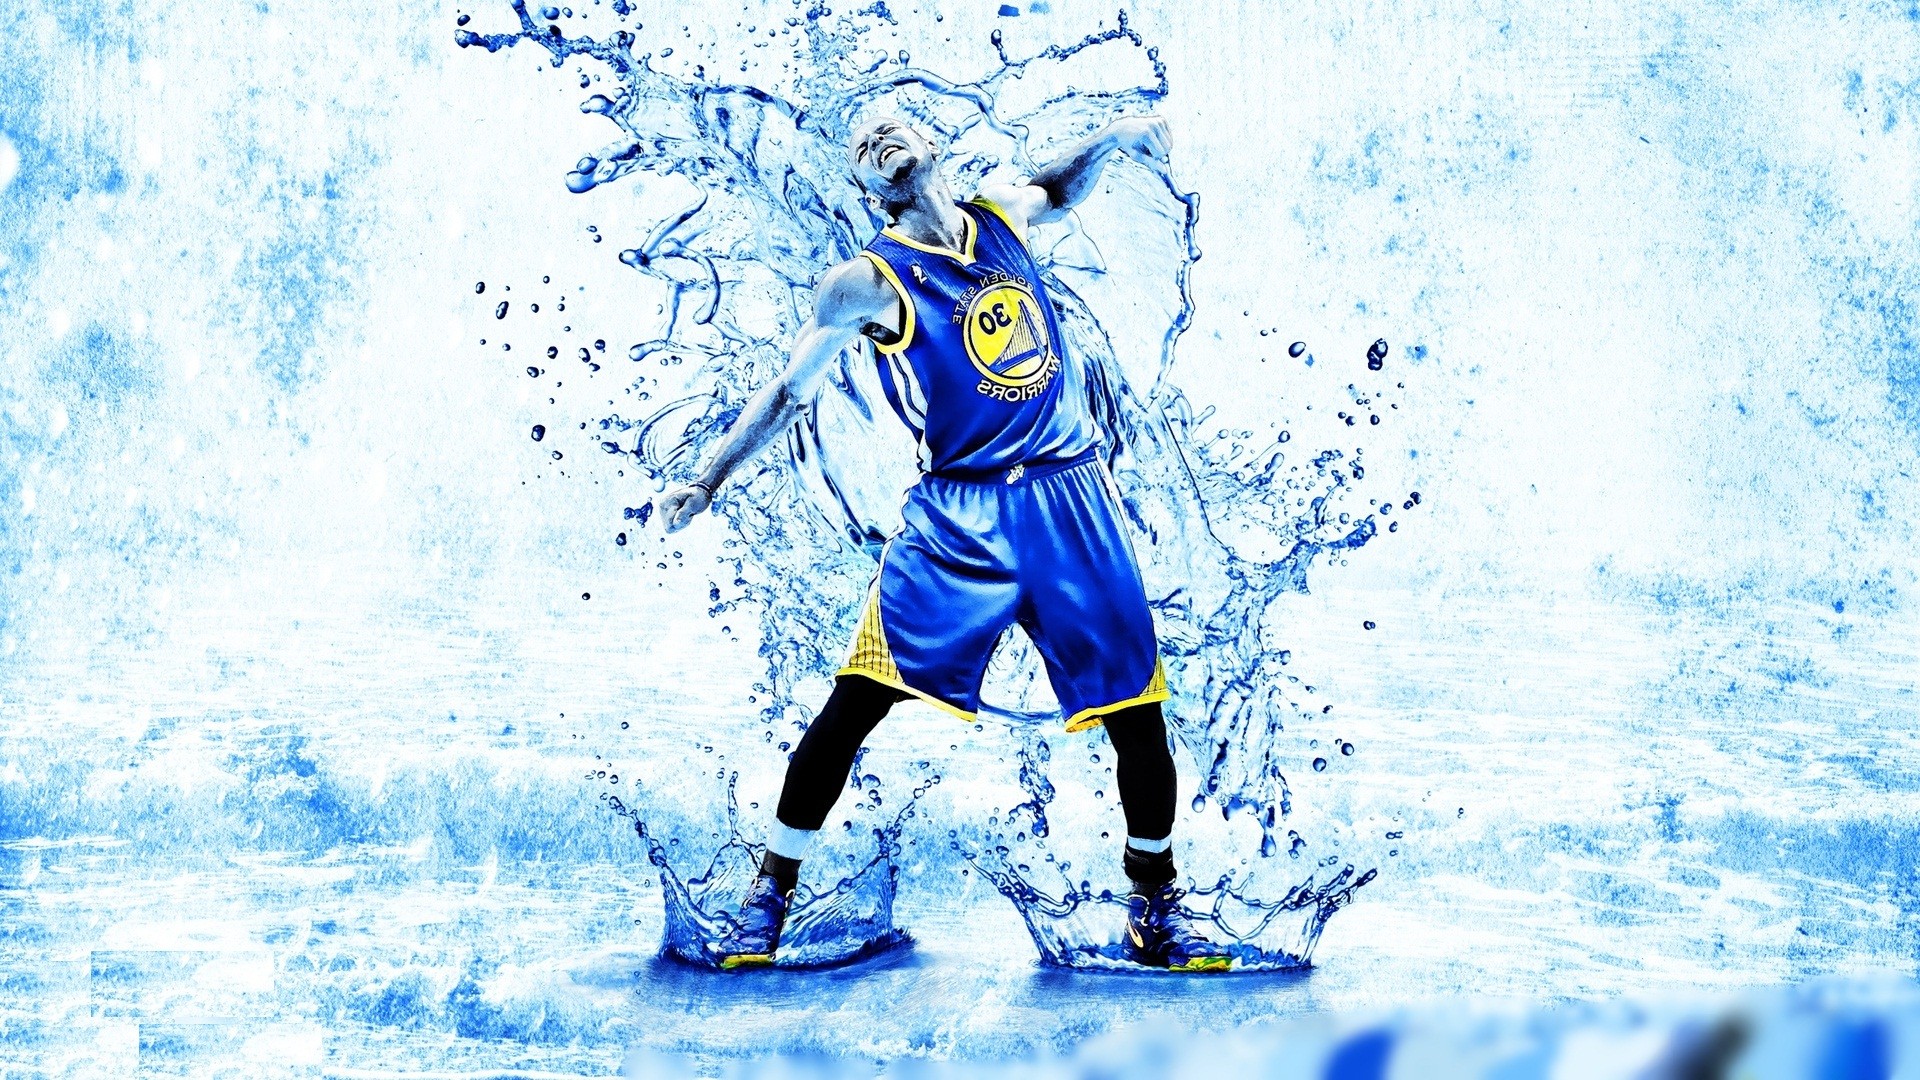 Stephen Curry Wallpaper 2015 | Image Gallery and More